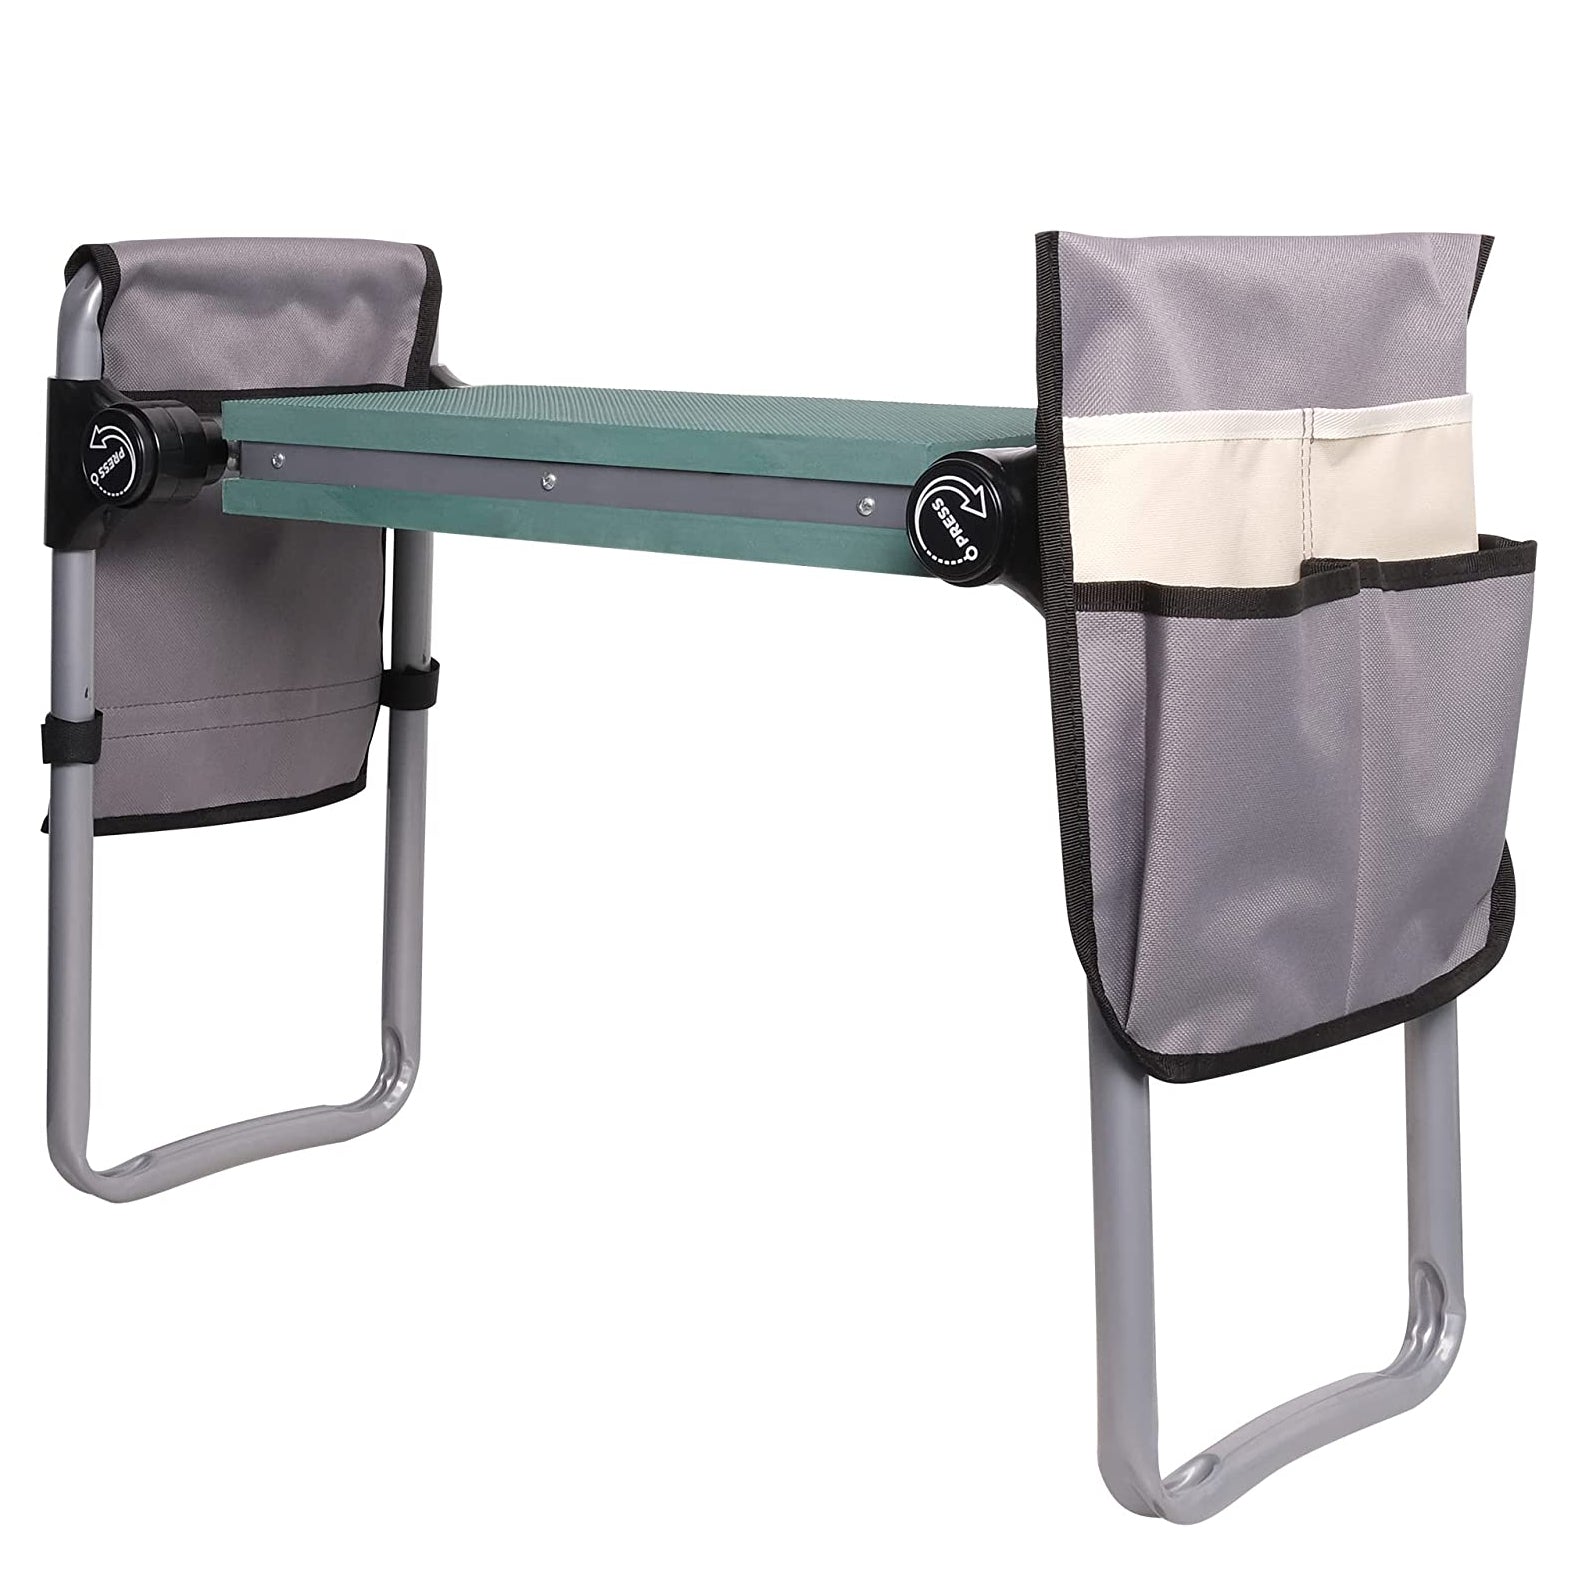 2-in-1 Garden Kneeler Stool Gardening Bench for Kneeling or Sitting with 2 Tool Bag Pouch, Green